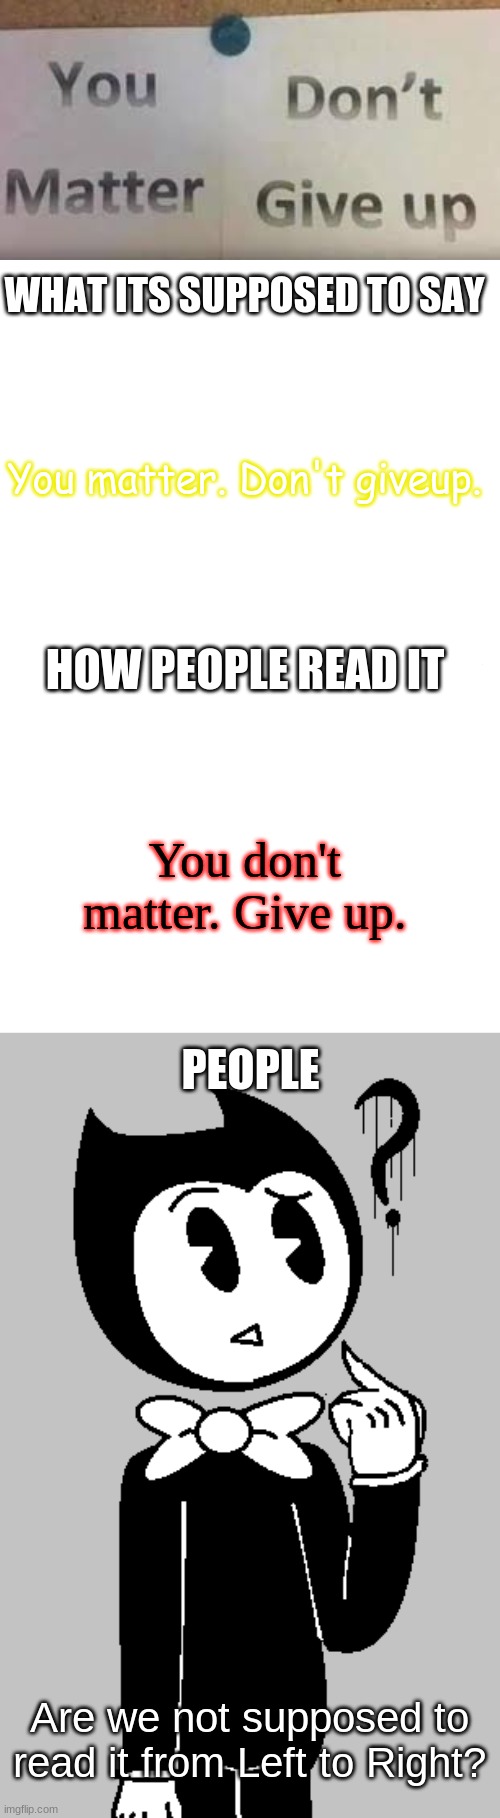 Whats It's Supposed To Say | WHAT ITS SUPPOSED TO SAY; You matter. Don't giveup. HOW PEOPLE READ IT; You don't matter. Give up. PEOPLE; Are we not supposed to read it from Left to Right? | image tagged in bendy and the ink machine,bendy,what it's supposed to say | made w/ Imgflip meme maker